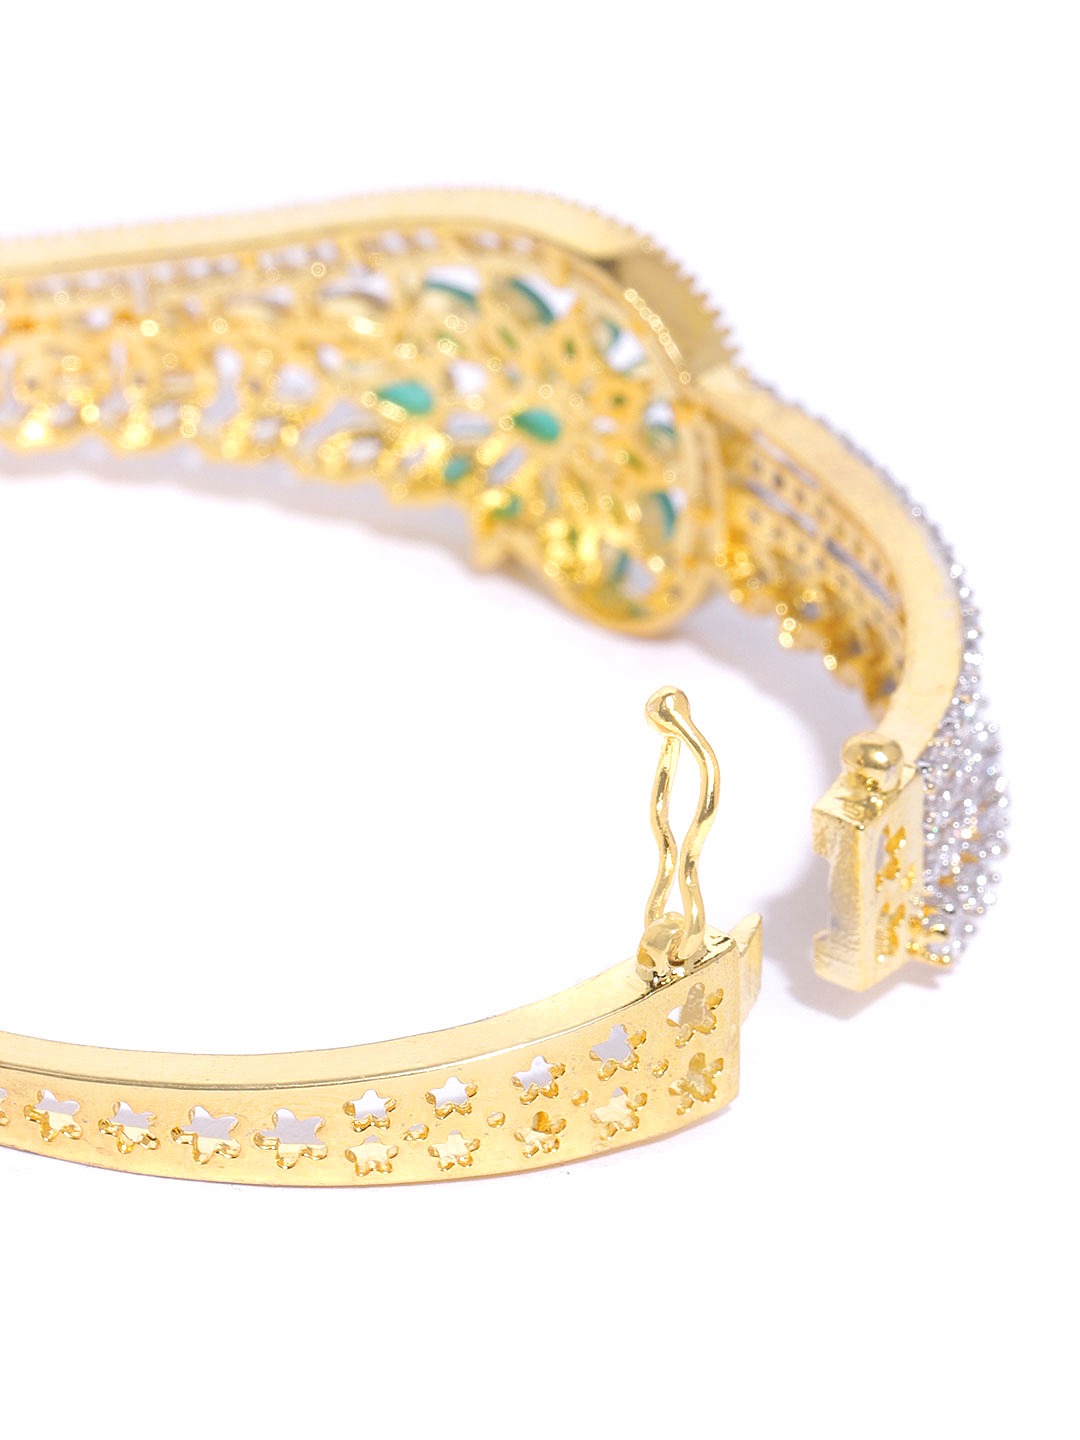 Gold-Plated American Diamond and Emerald Studded, Floral Patterned Bracelet in Green Color